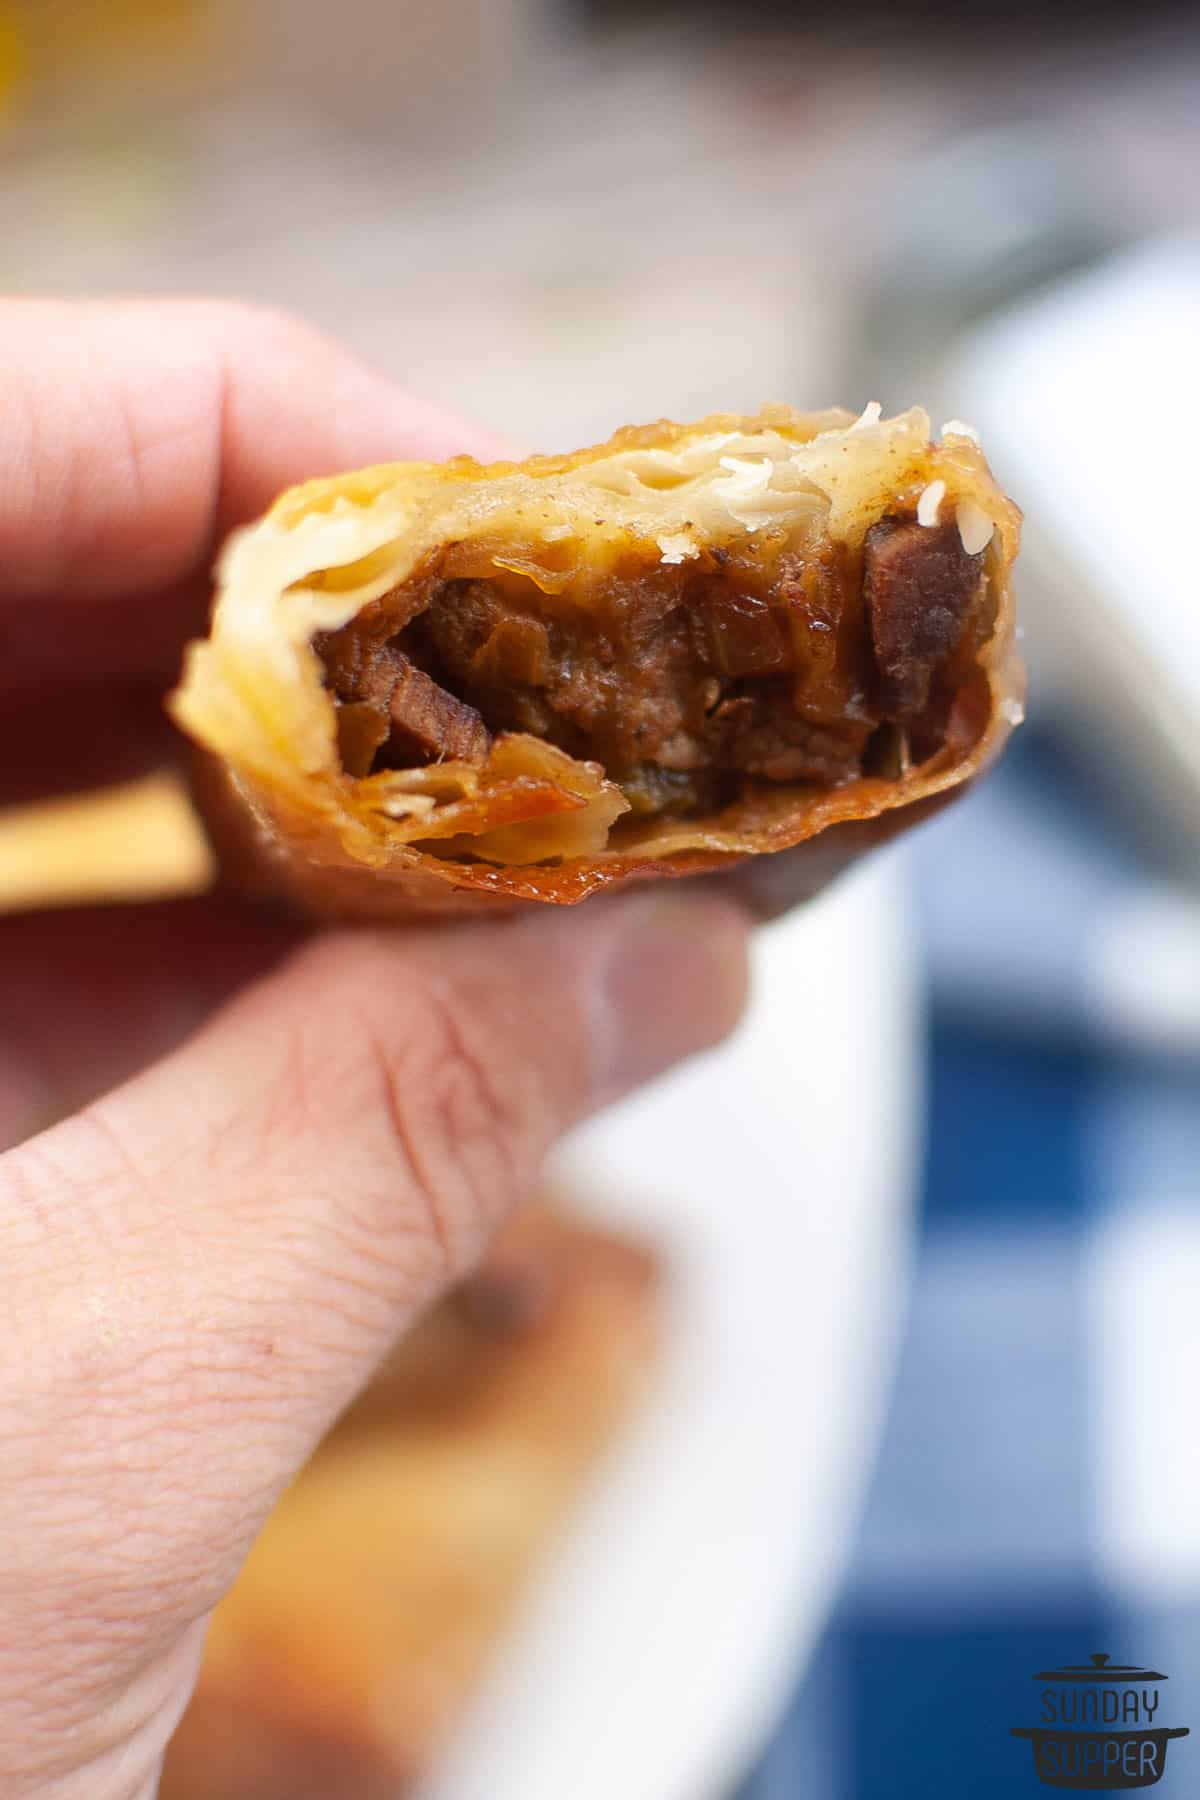 a cut open egg roll being held up